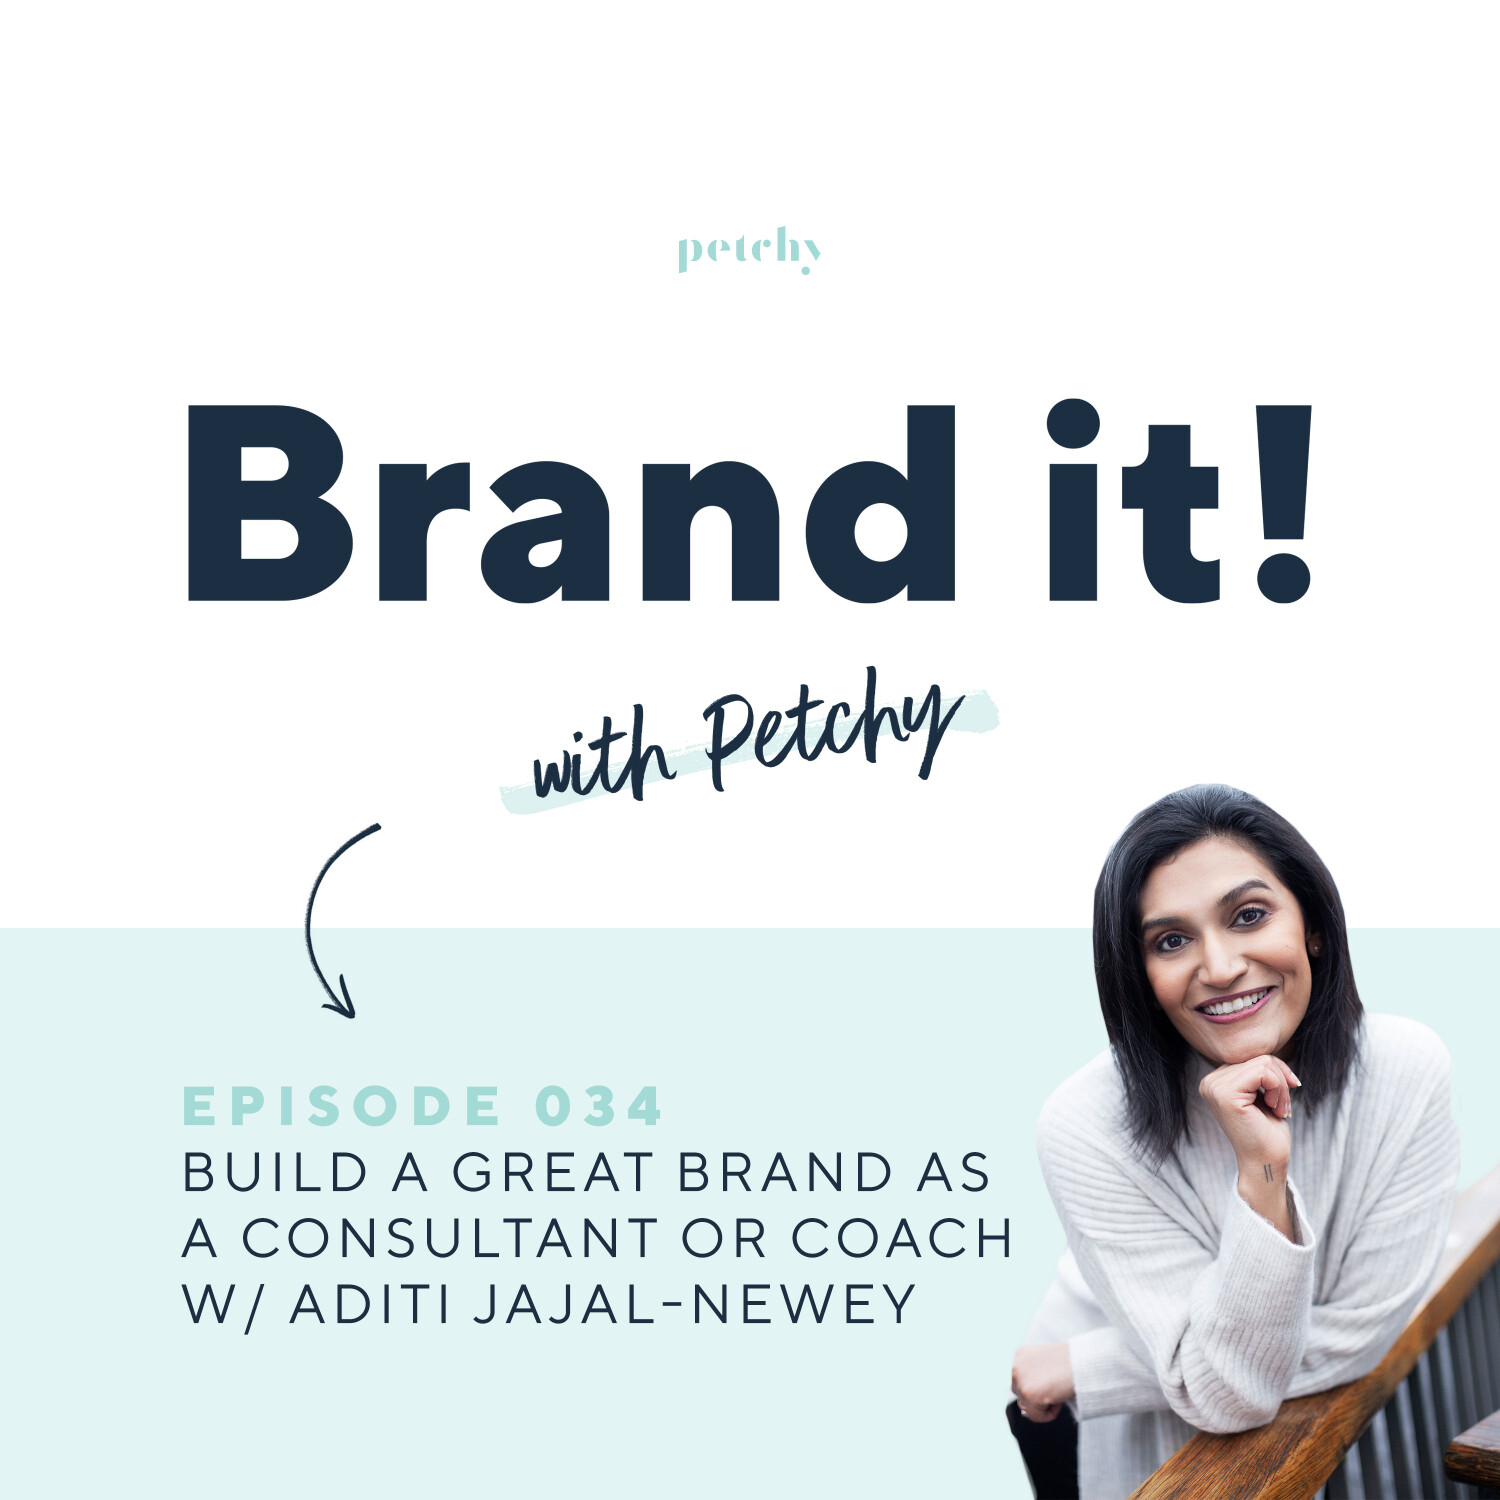 How to build a great brand as a consultant or coach w/ Aditi Jajal-Newey